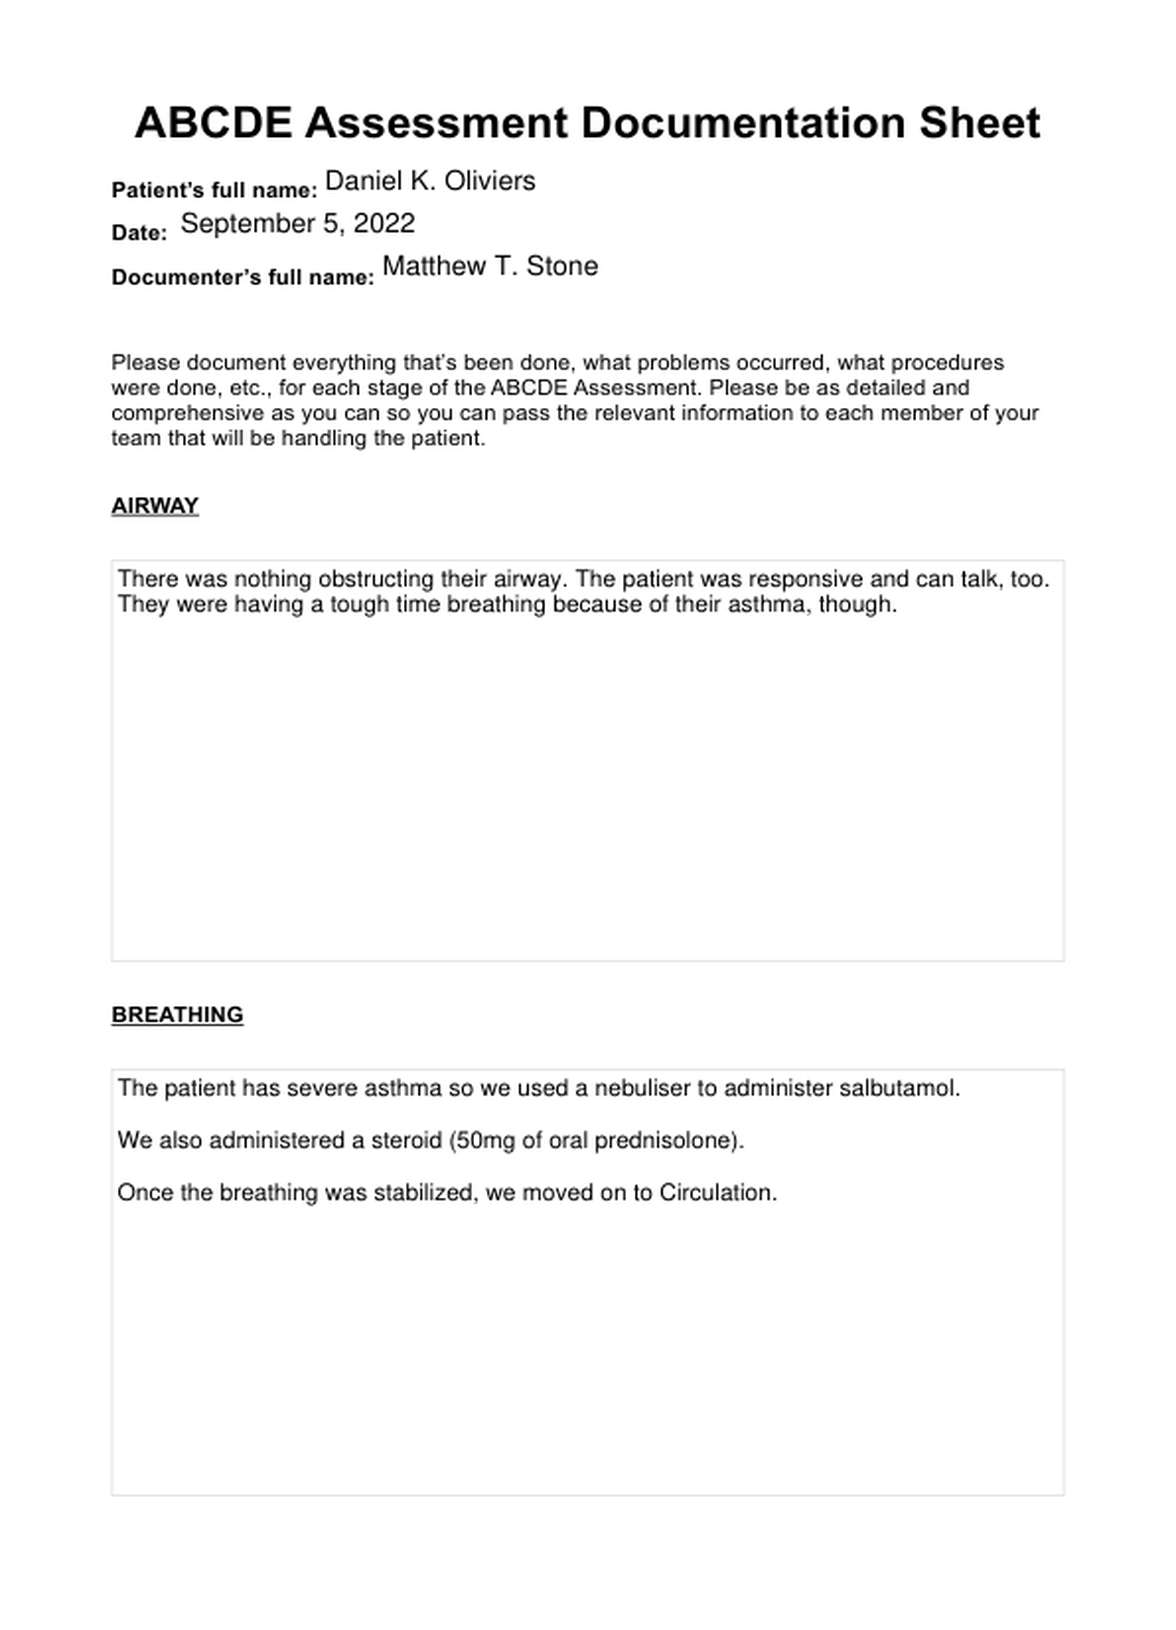 ABCDE Assessment PDF Example